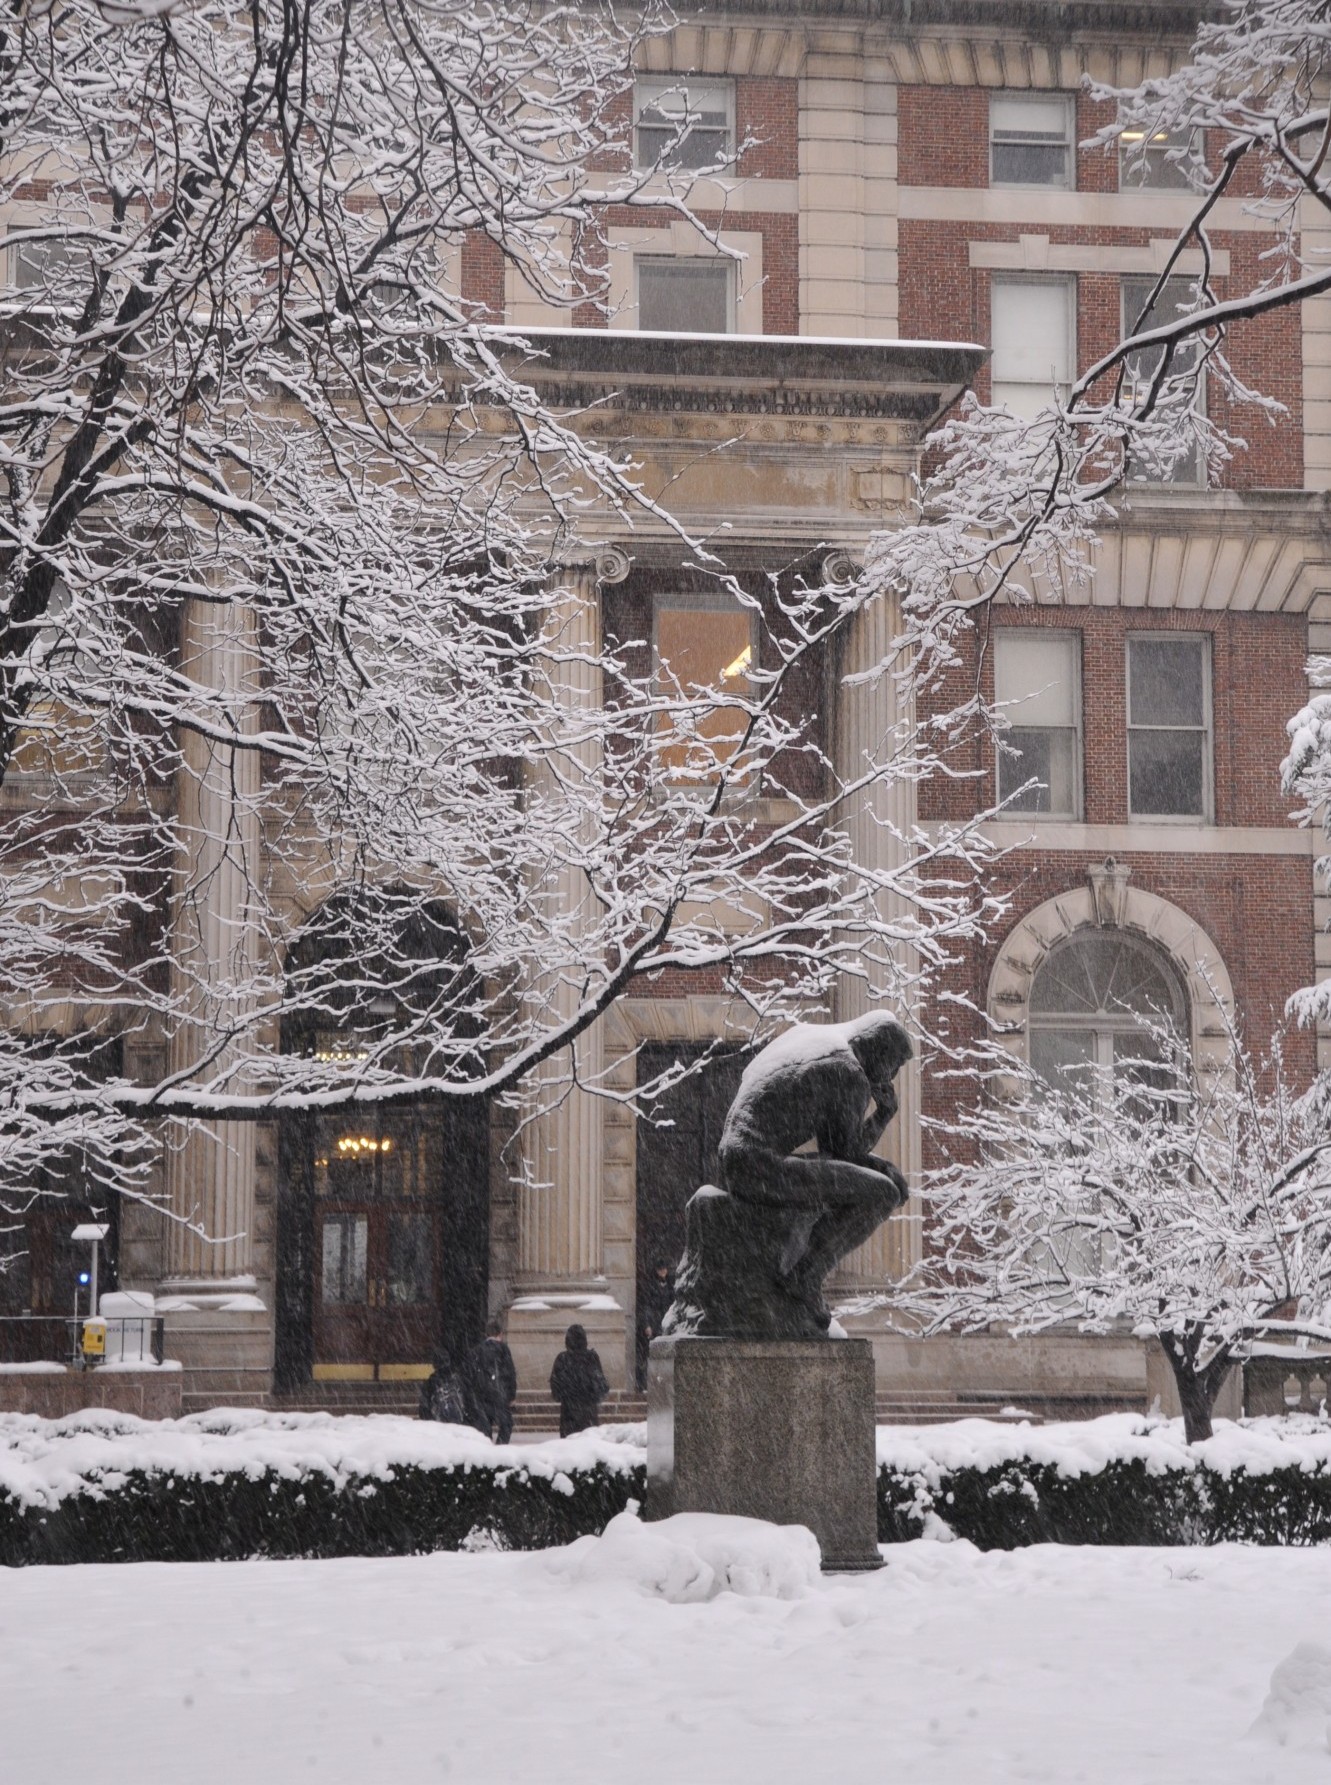 Kent Hall and The Thinker sculpture in winter